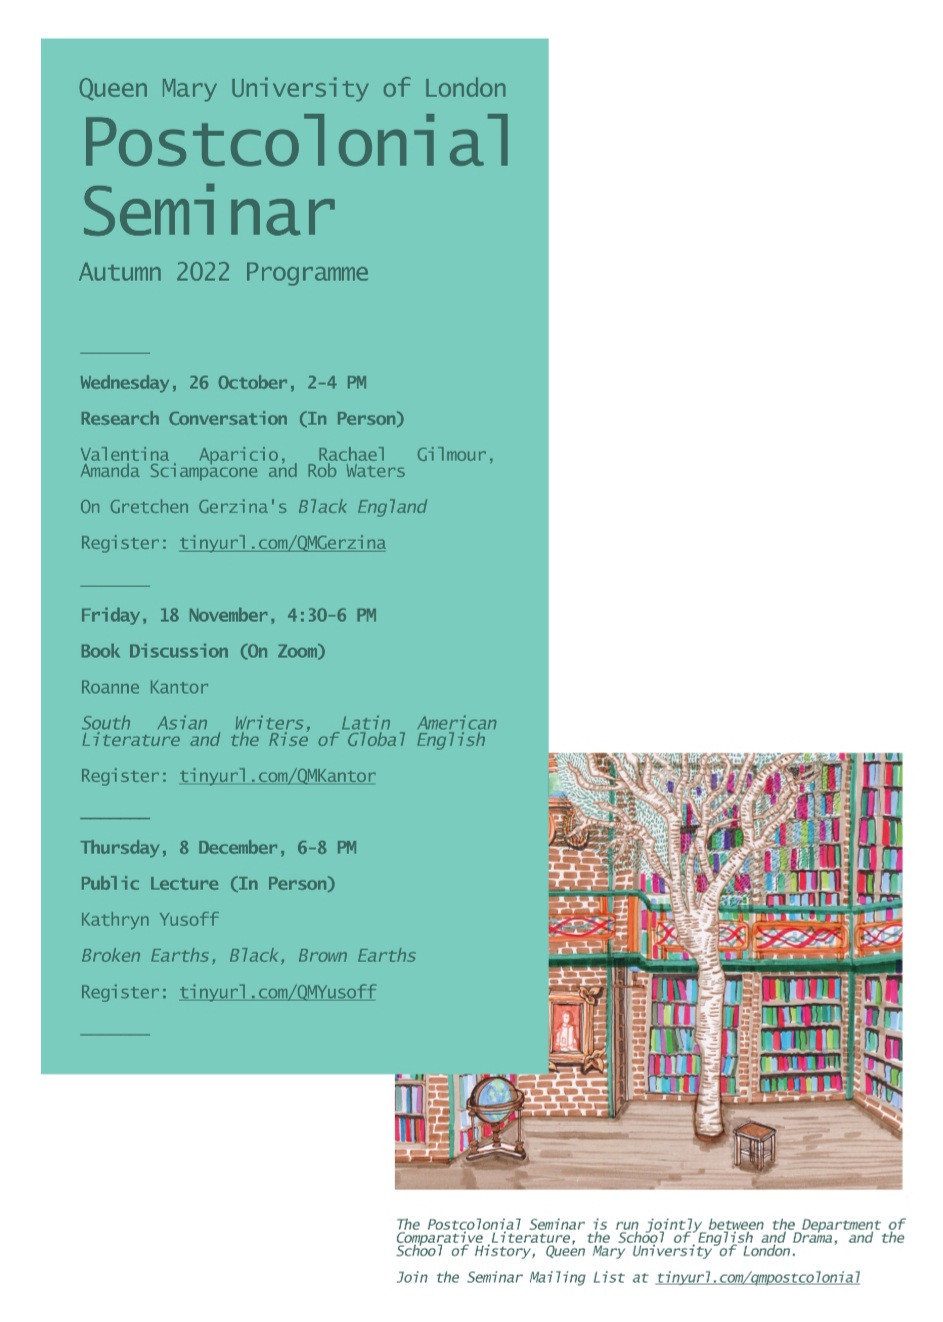 Poster showing details of postcolonial seminar Autumn 2022